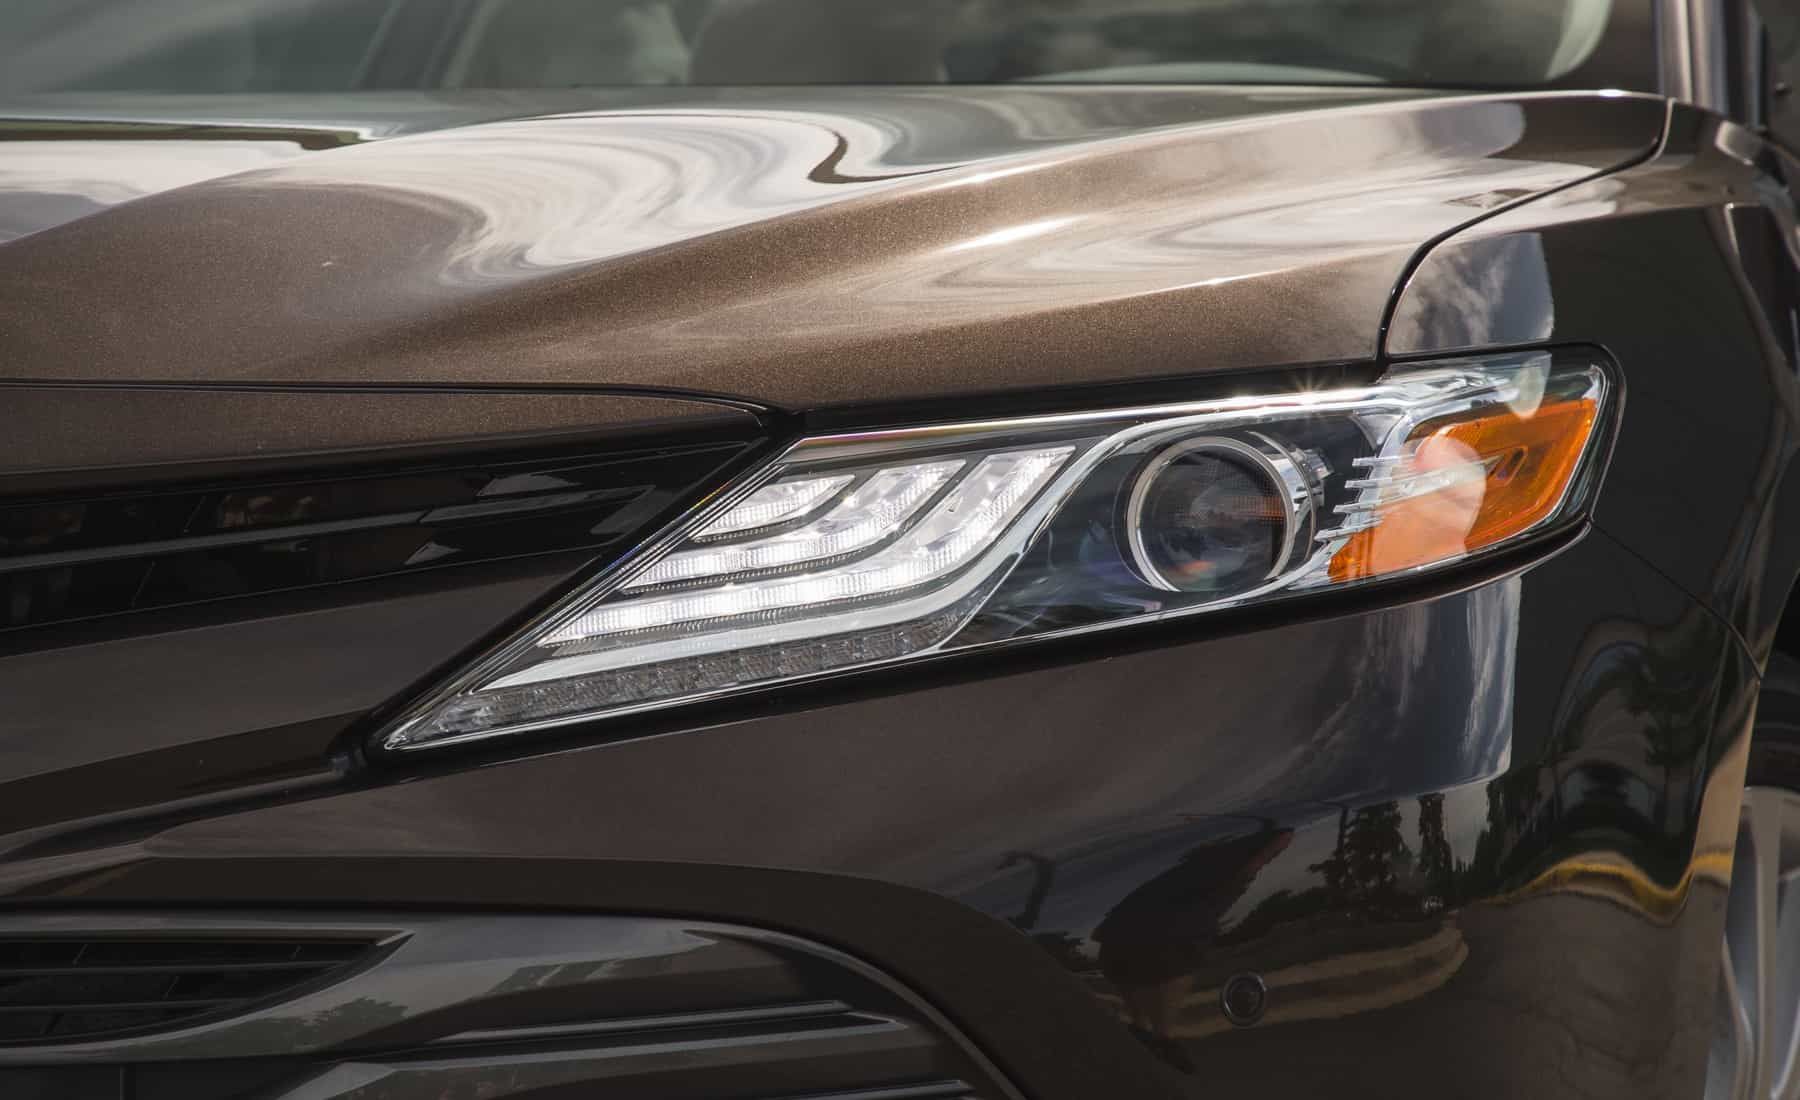 2018 Toyota Camry Hybrid XLE Exterior View Headlight (View 33 of 41)